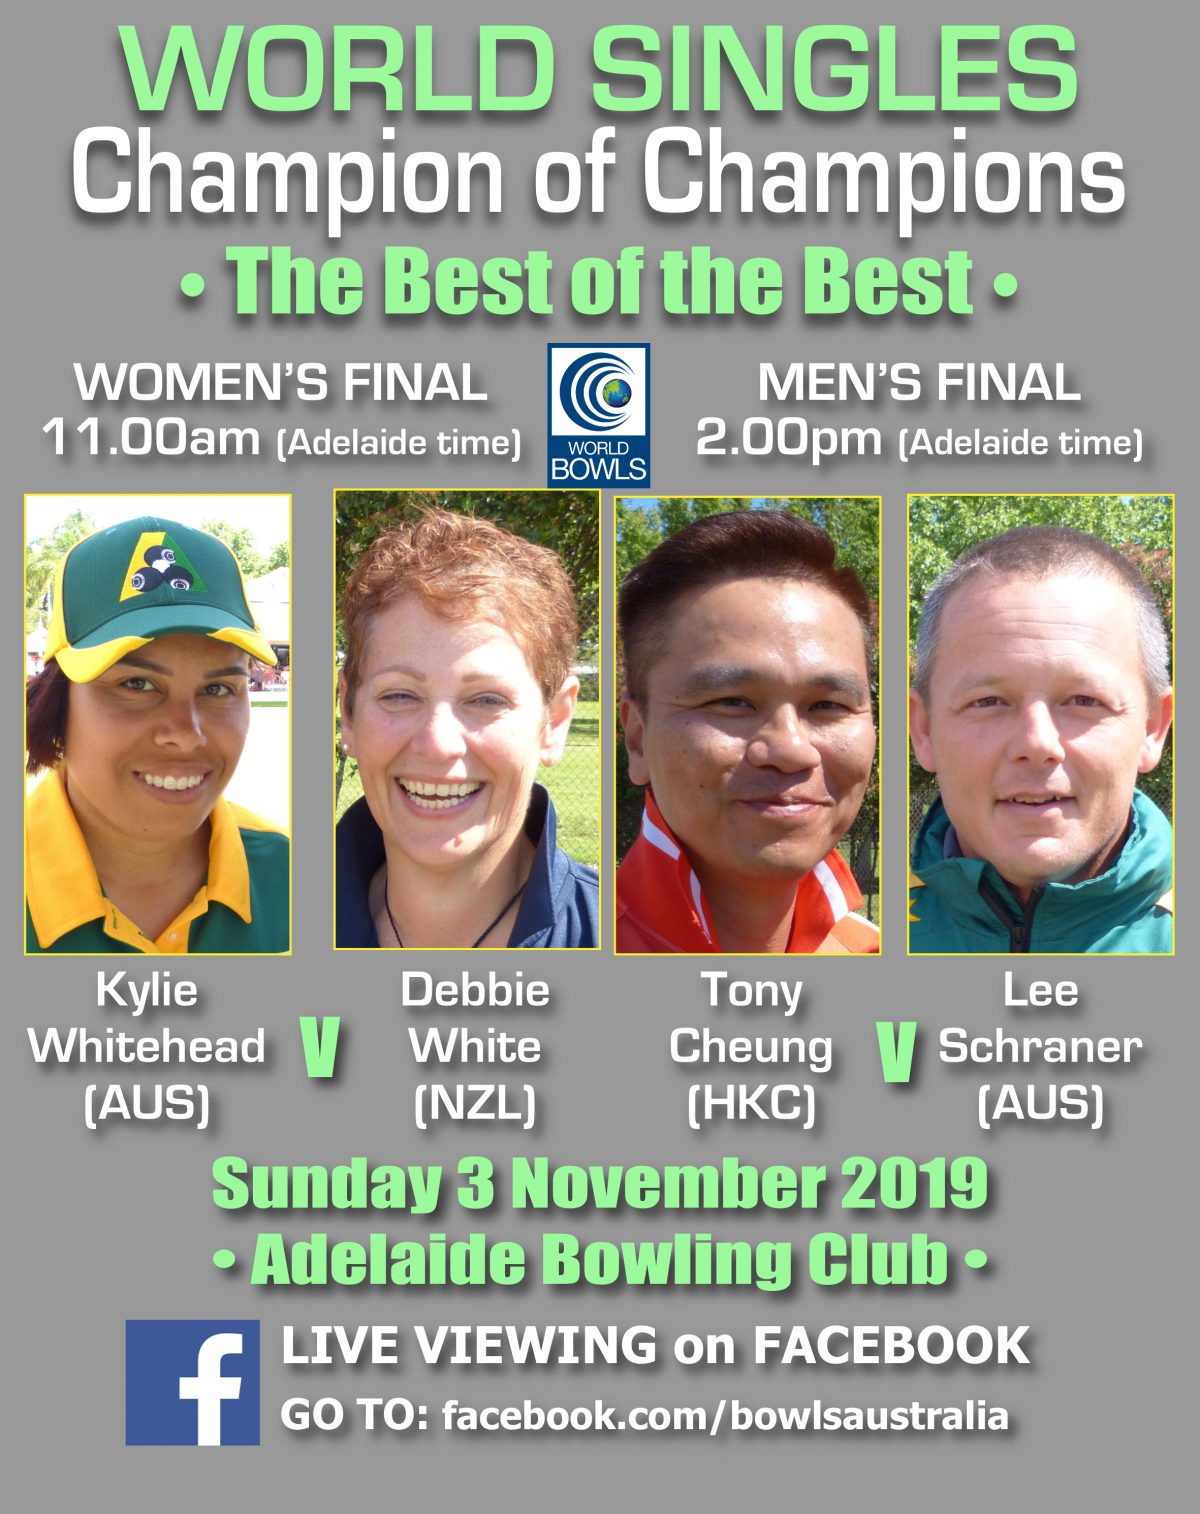 The finals are due to take place tomorrow ©World Bowls